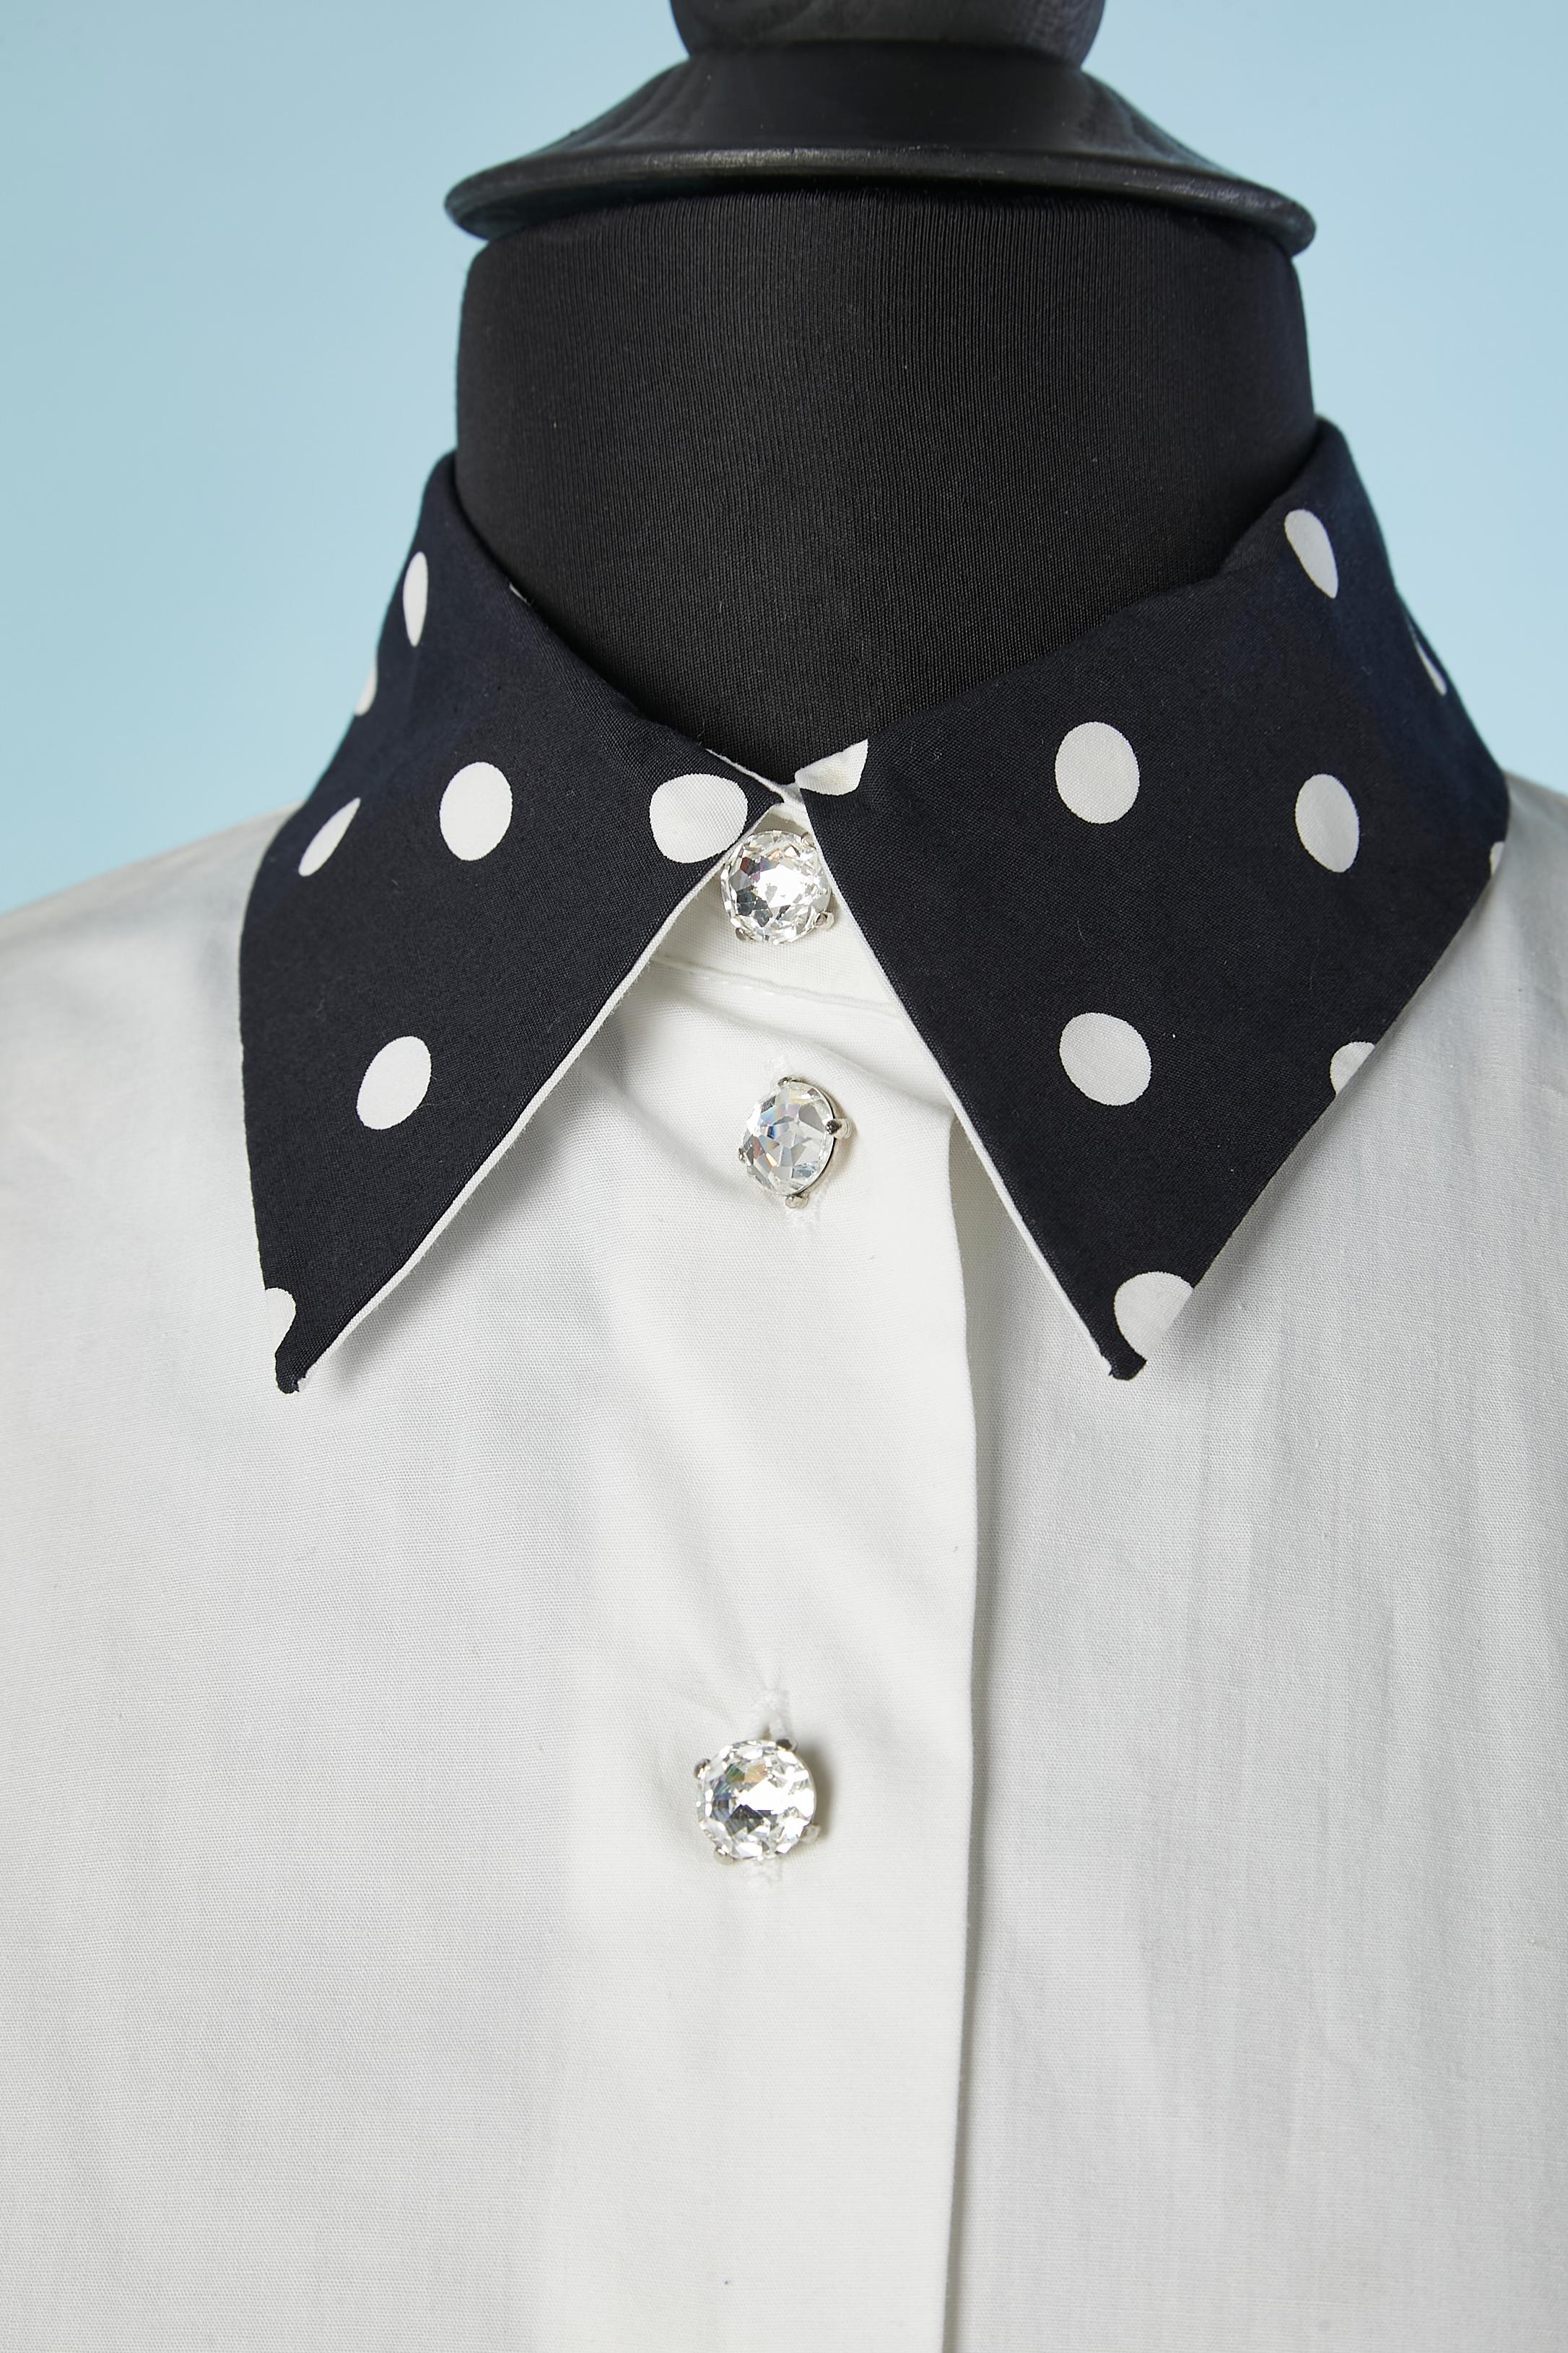 Cotton shirt with polka dots collar and Rhinestone buttons. Rhinestone buttons on the cuffs as well. 
Size 38 (Fr) 8 (Us) 